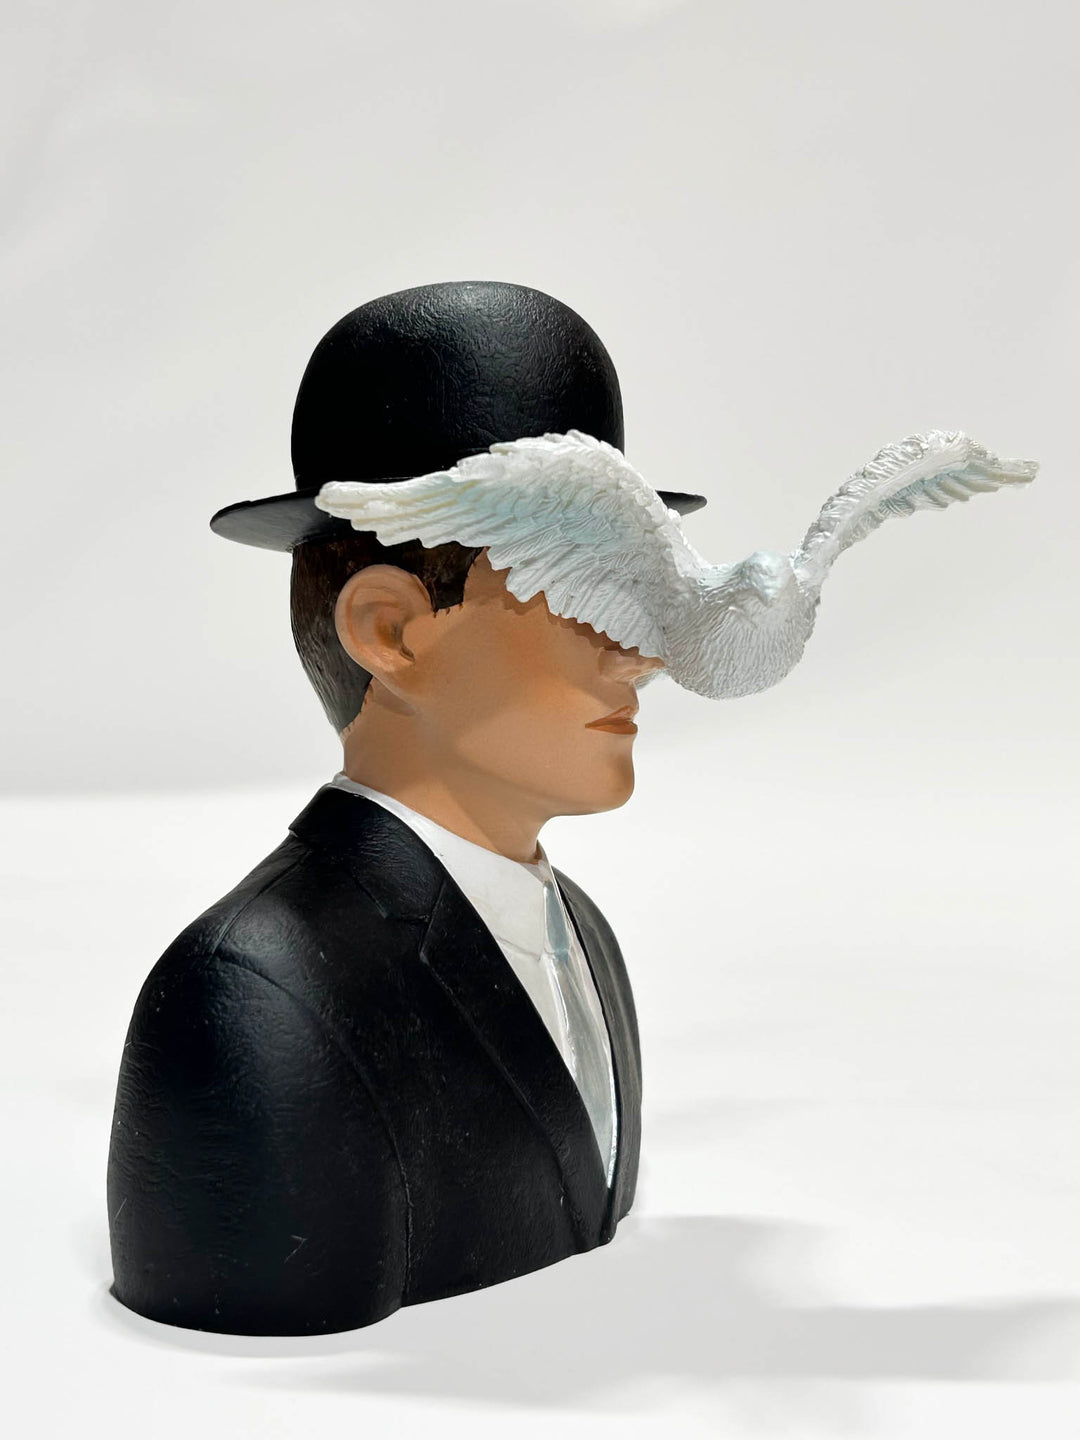 Man In A Bowler Hat statue 